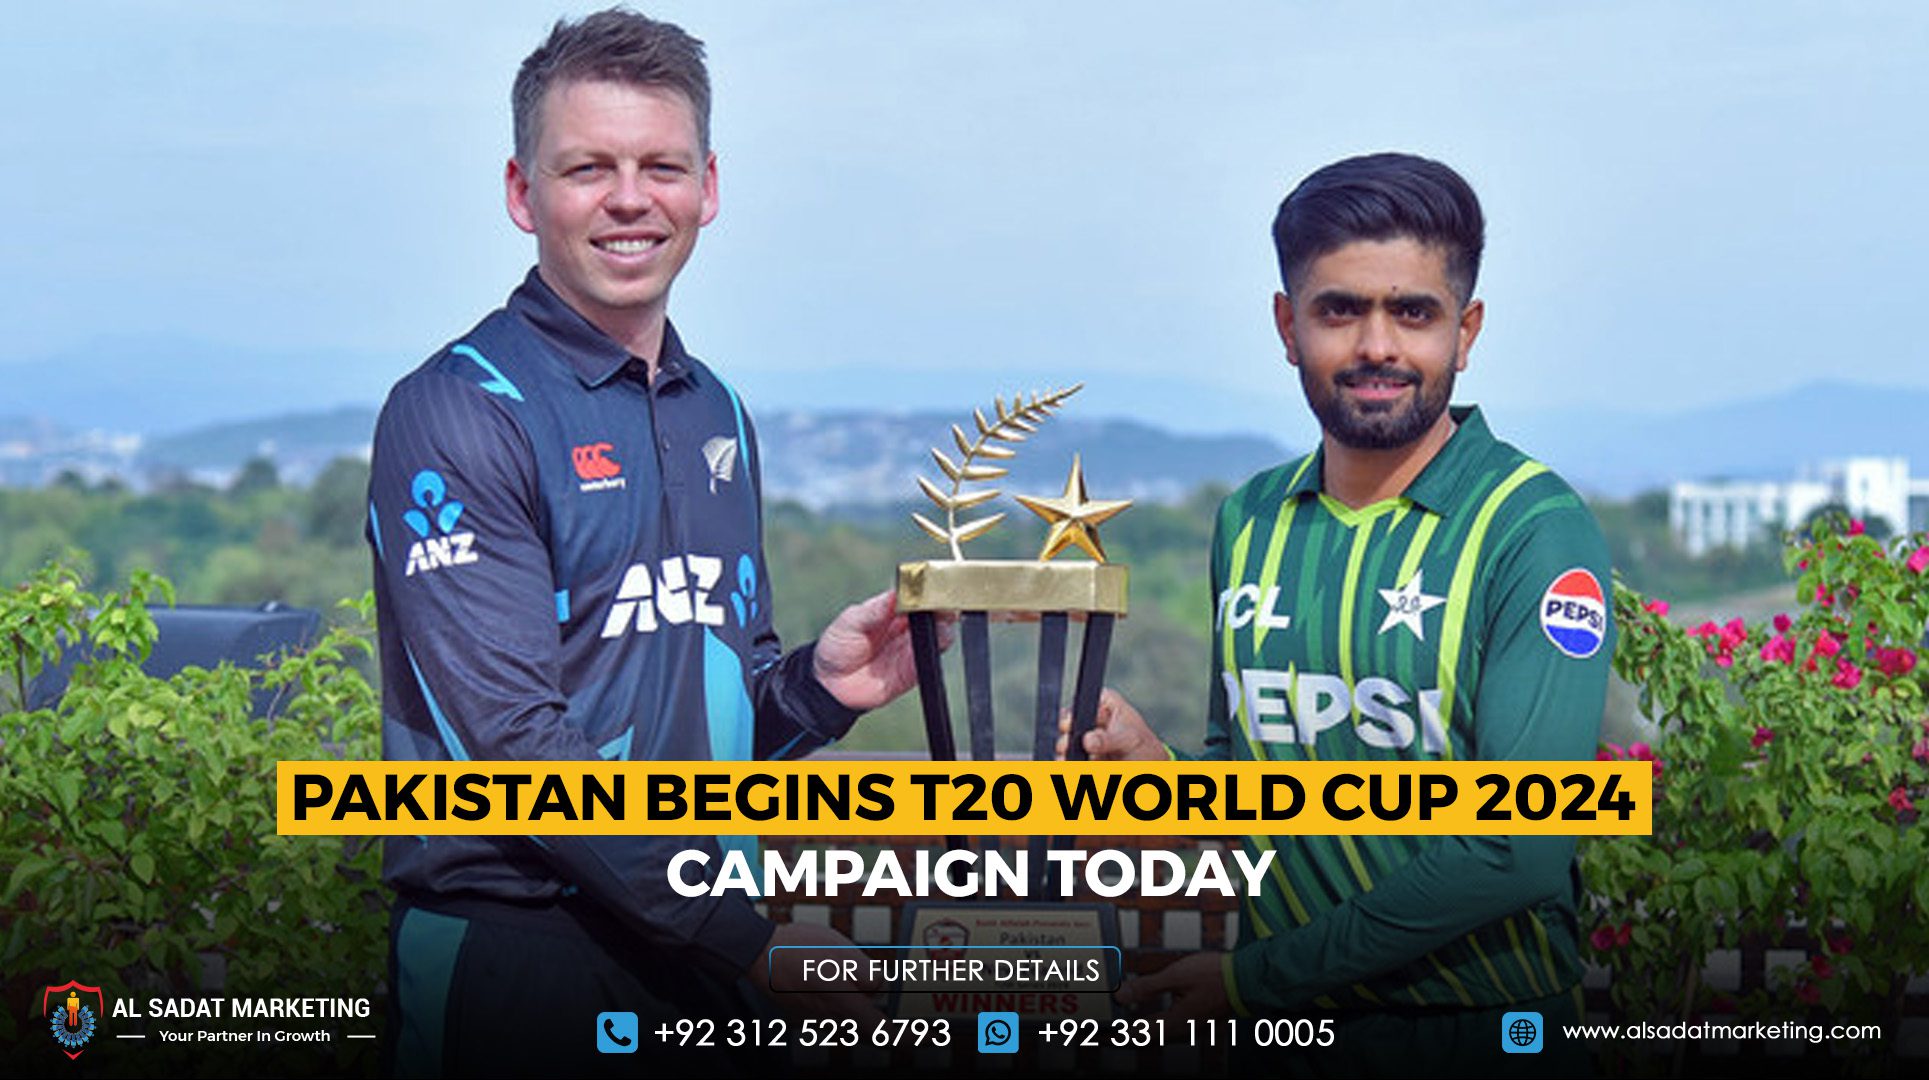 Pakistan Begins T20 World Cup 2024 Campaign Today